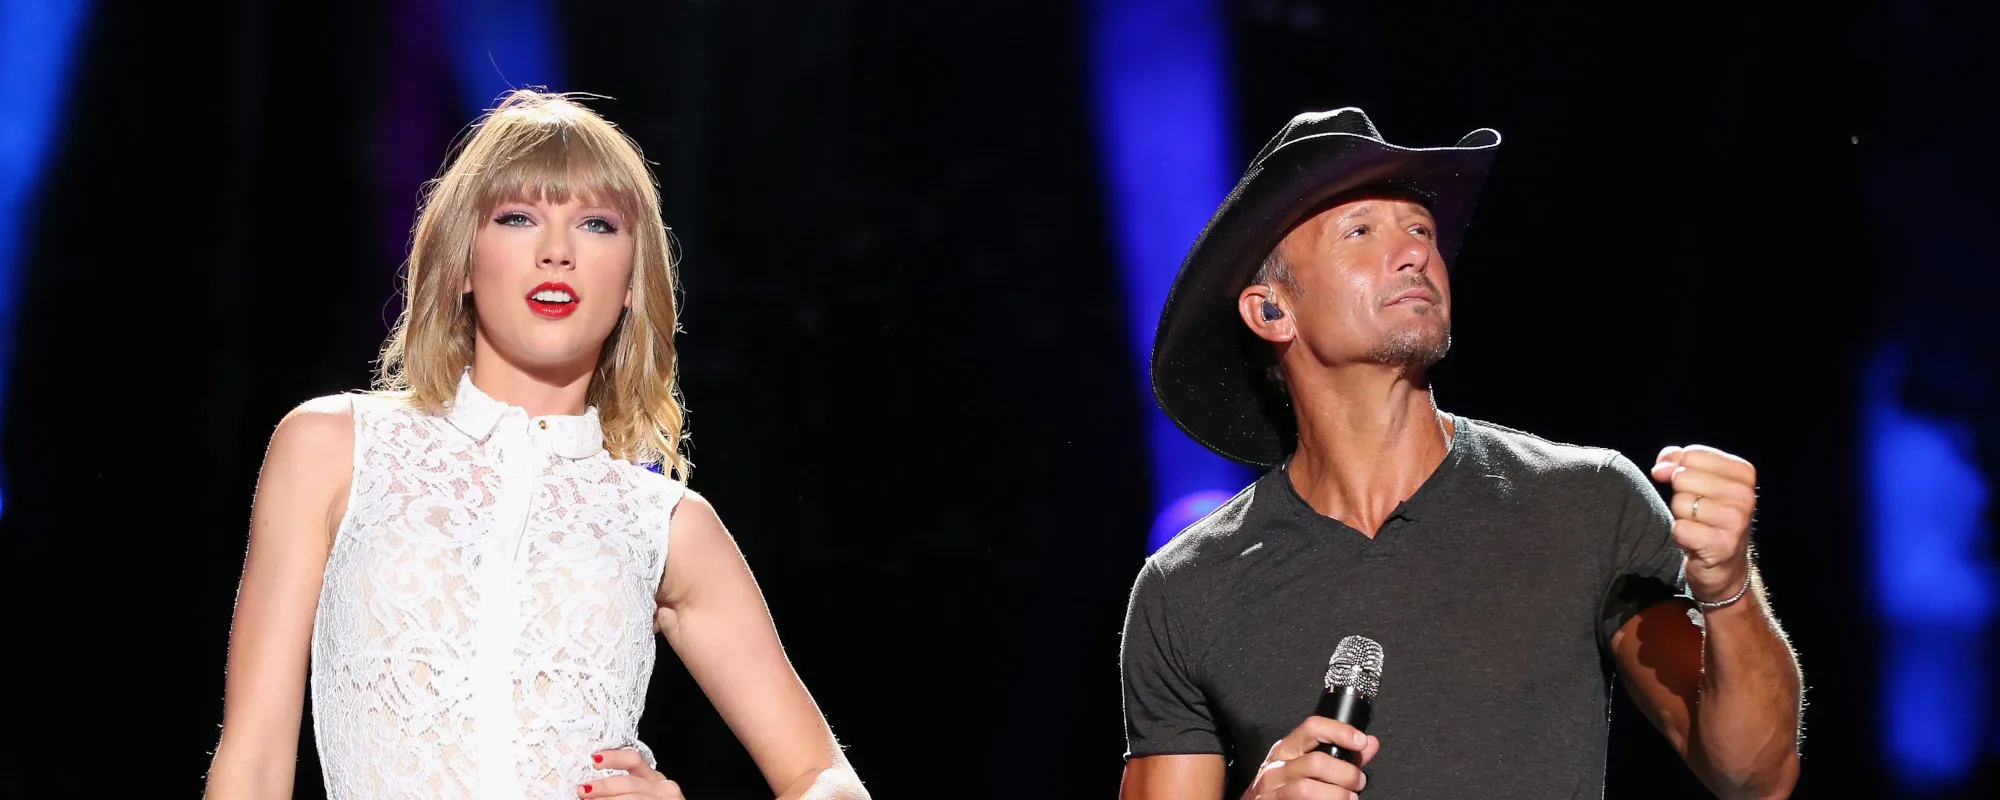 Tim McGraw Says He Knew Taylor Swift Would Be the “Biggest Star in the World” After Touring with Her in 2006